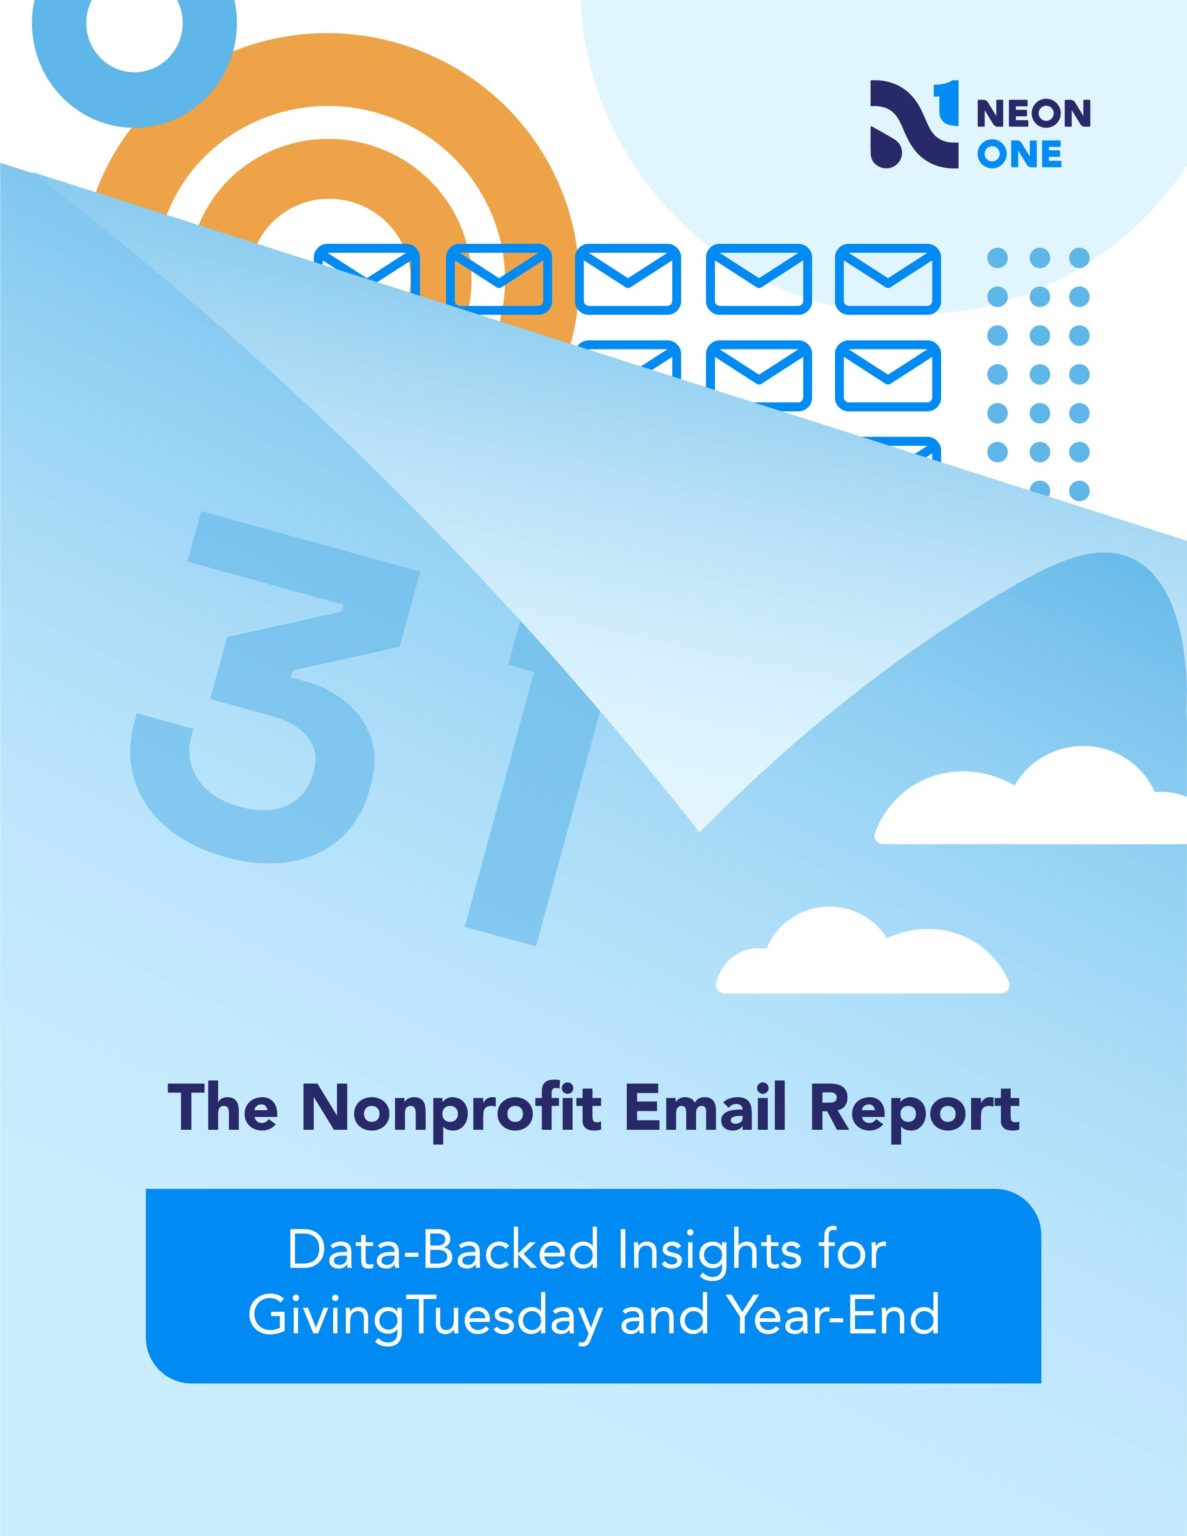 The Nonprofit Email Report: Data-Backed Insights for GivingTuesday and Year-End